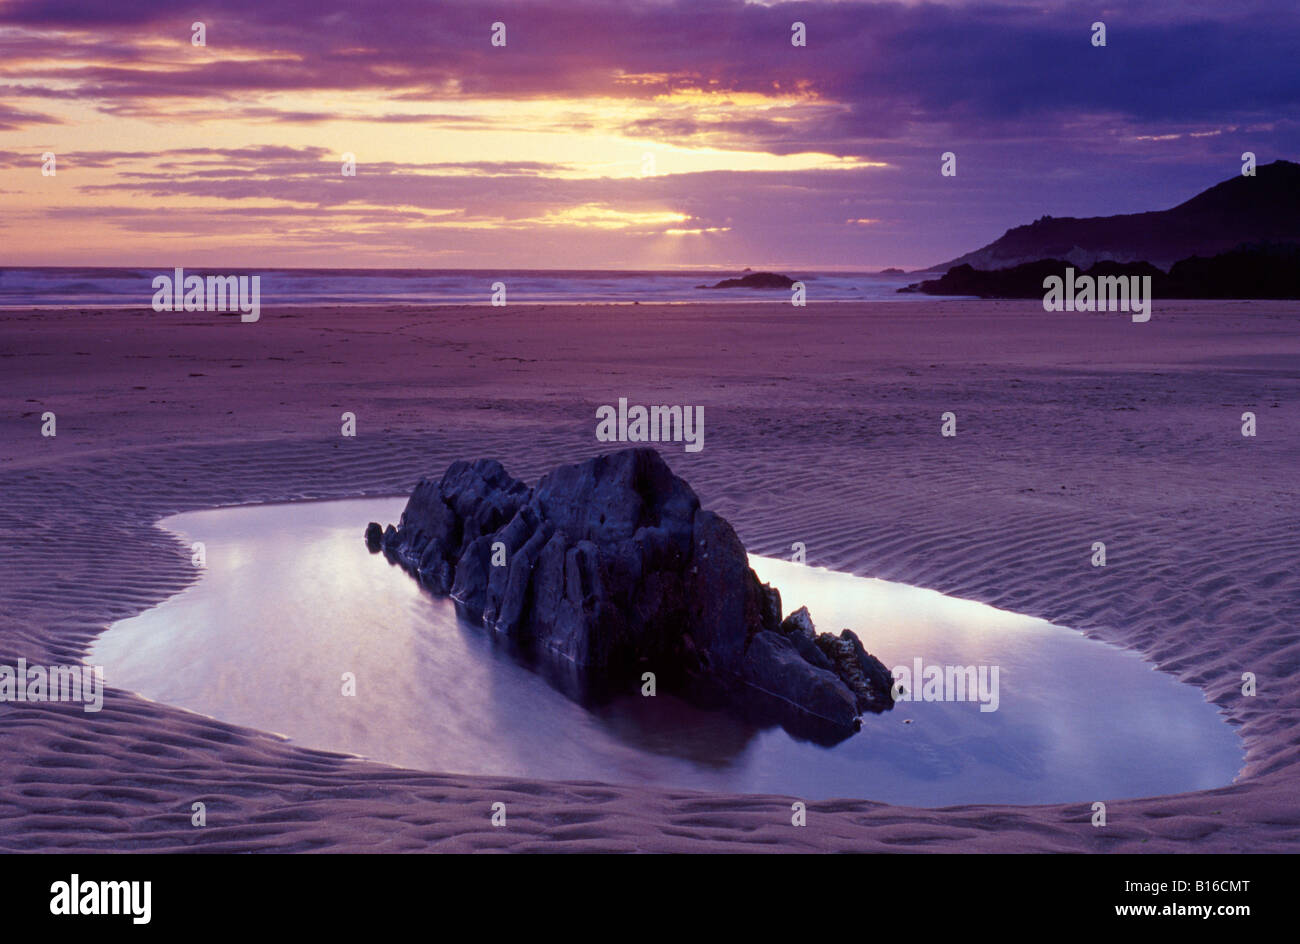 Rockpool on a beach in North Devon, UK, at sunset Stock Photo